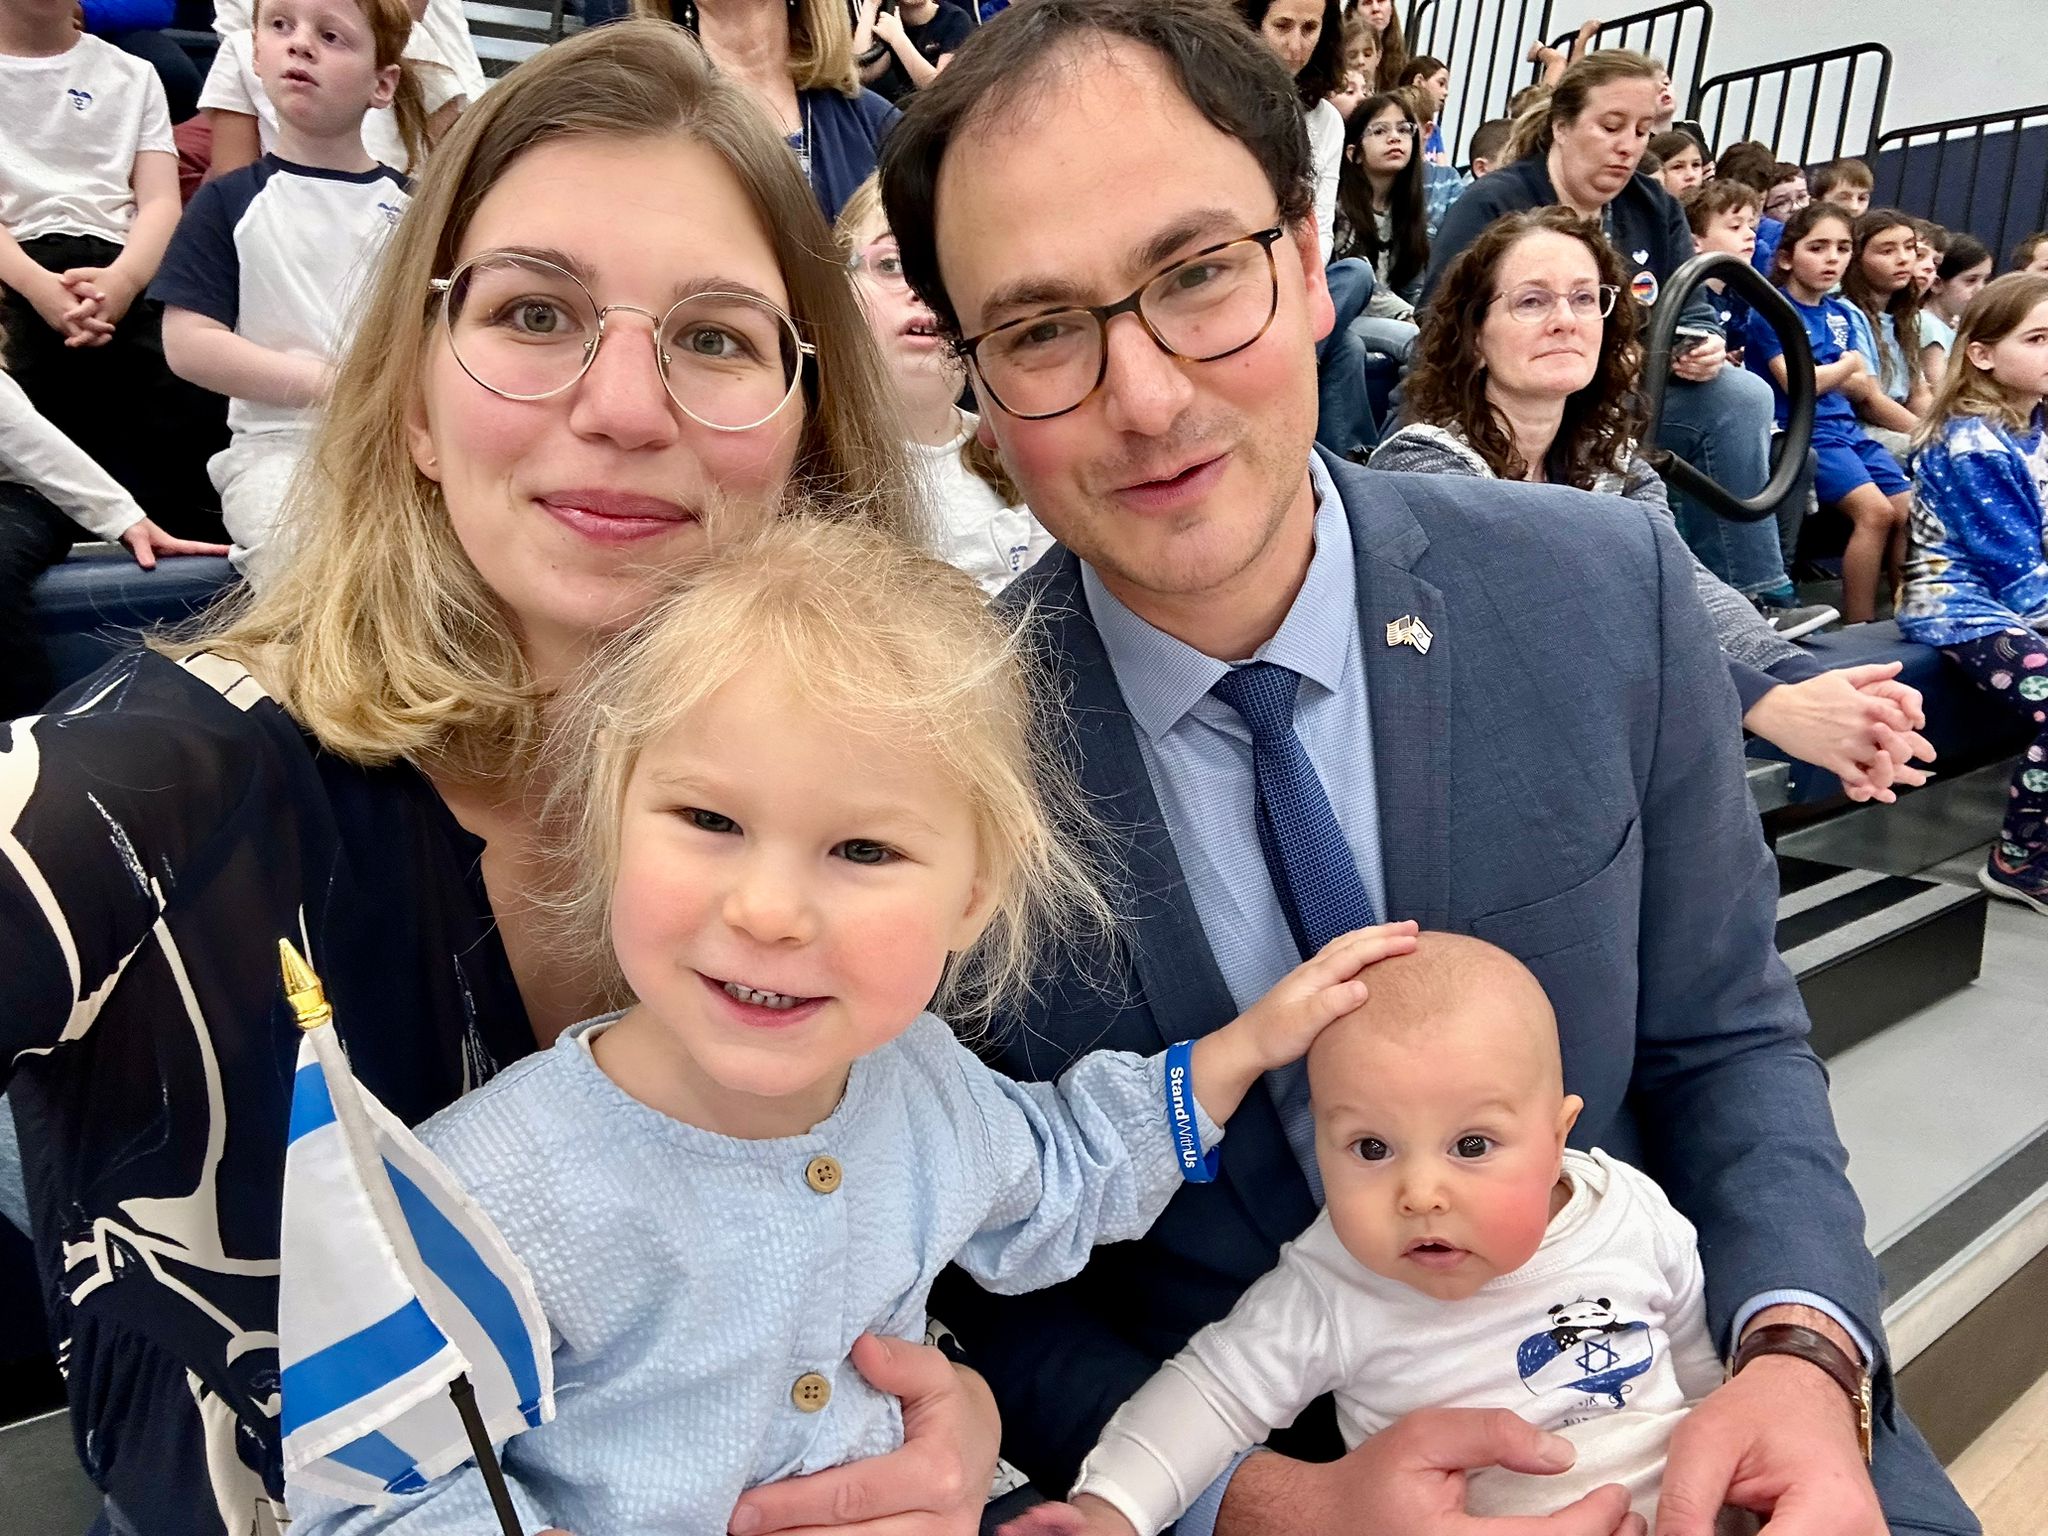 Daniel Aschheim with his wife, Elisa, and daughters, Ella and Noa. Credit: Courtesy.